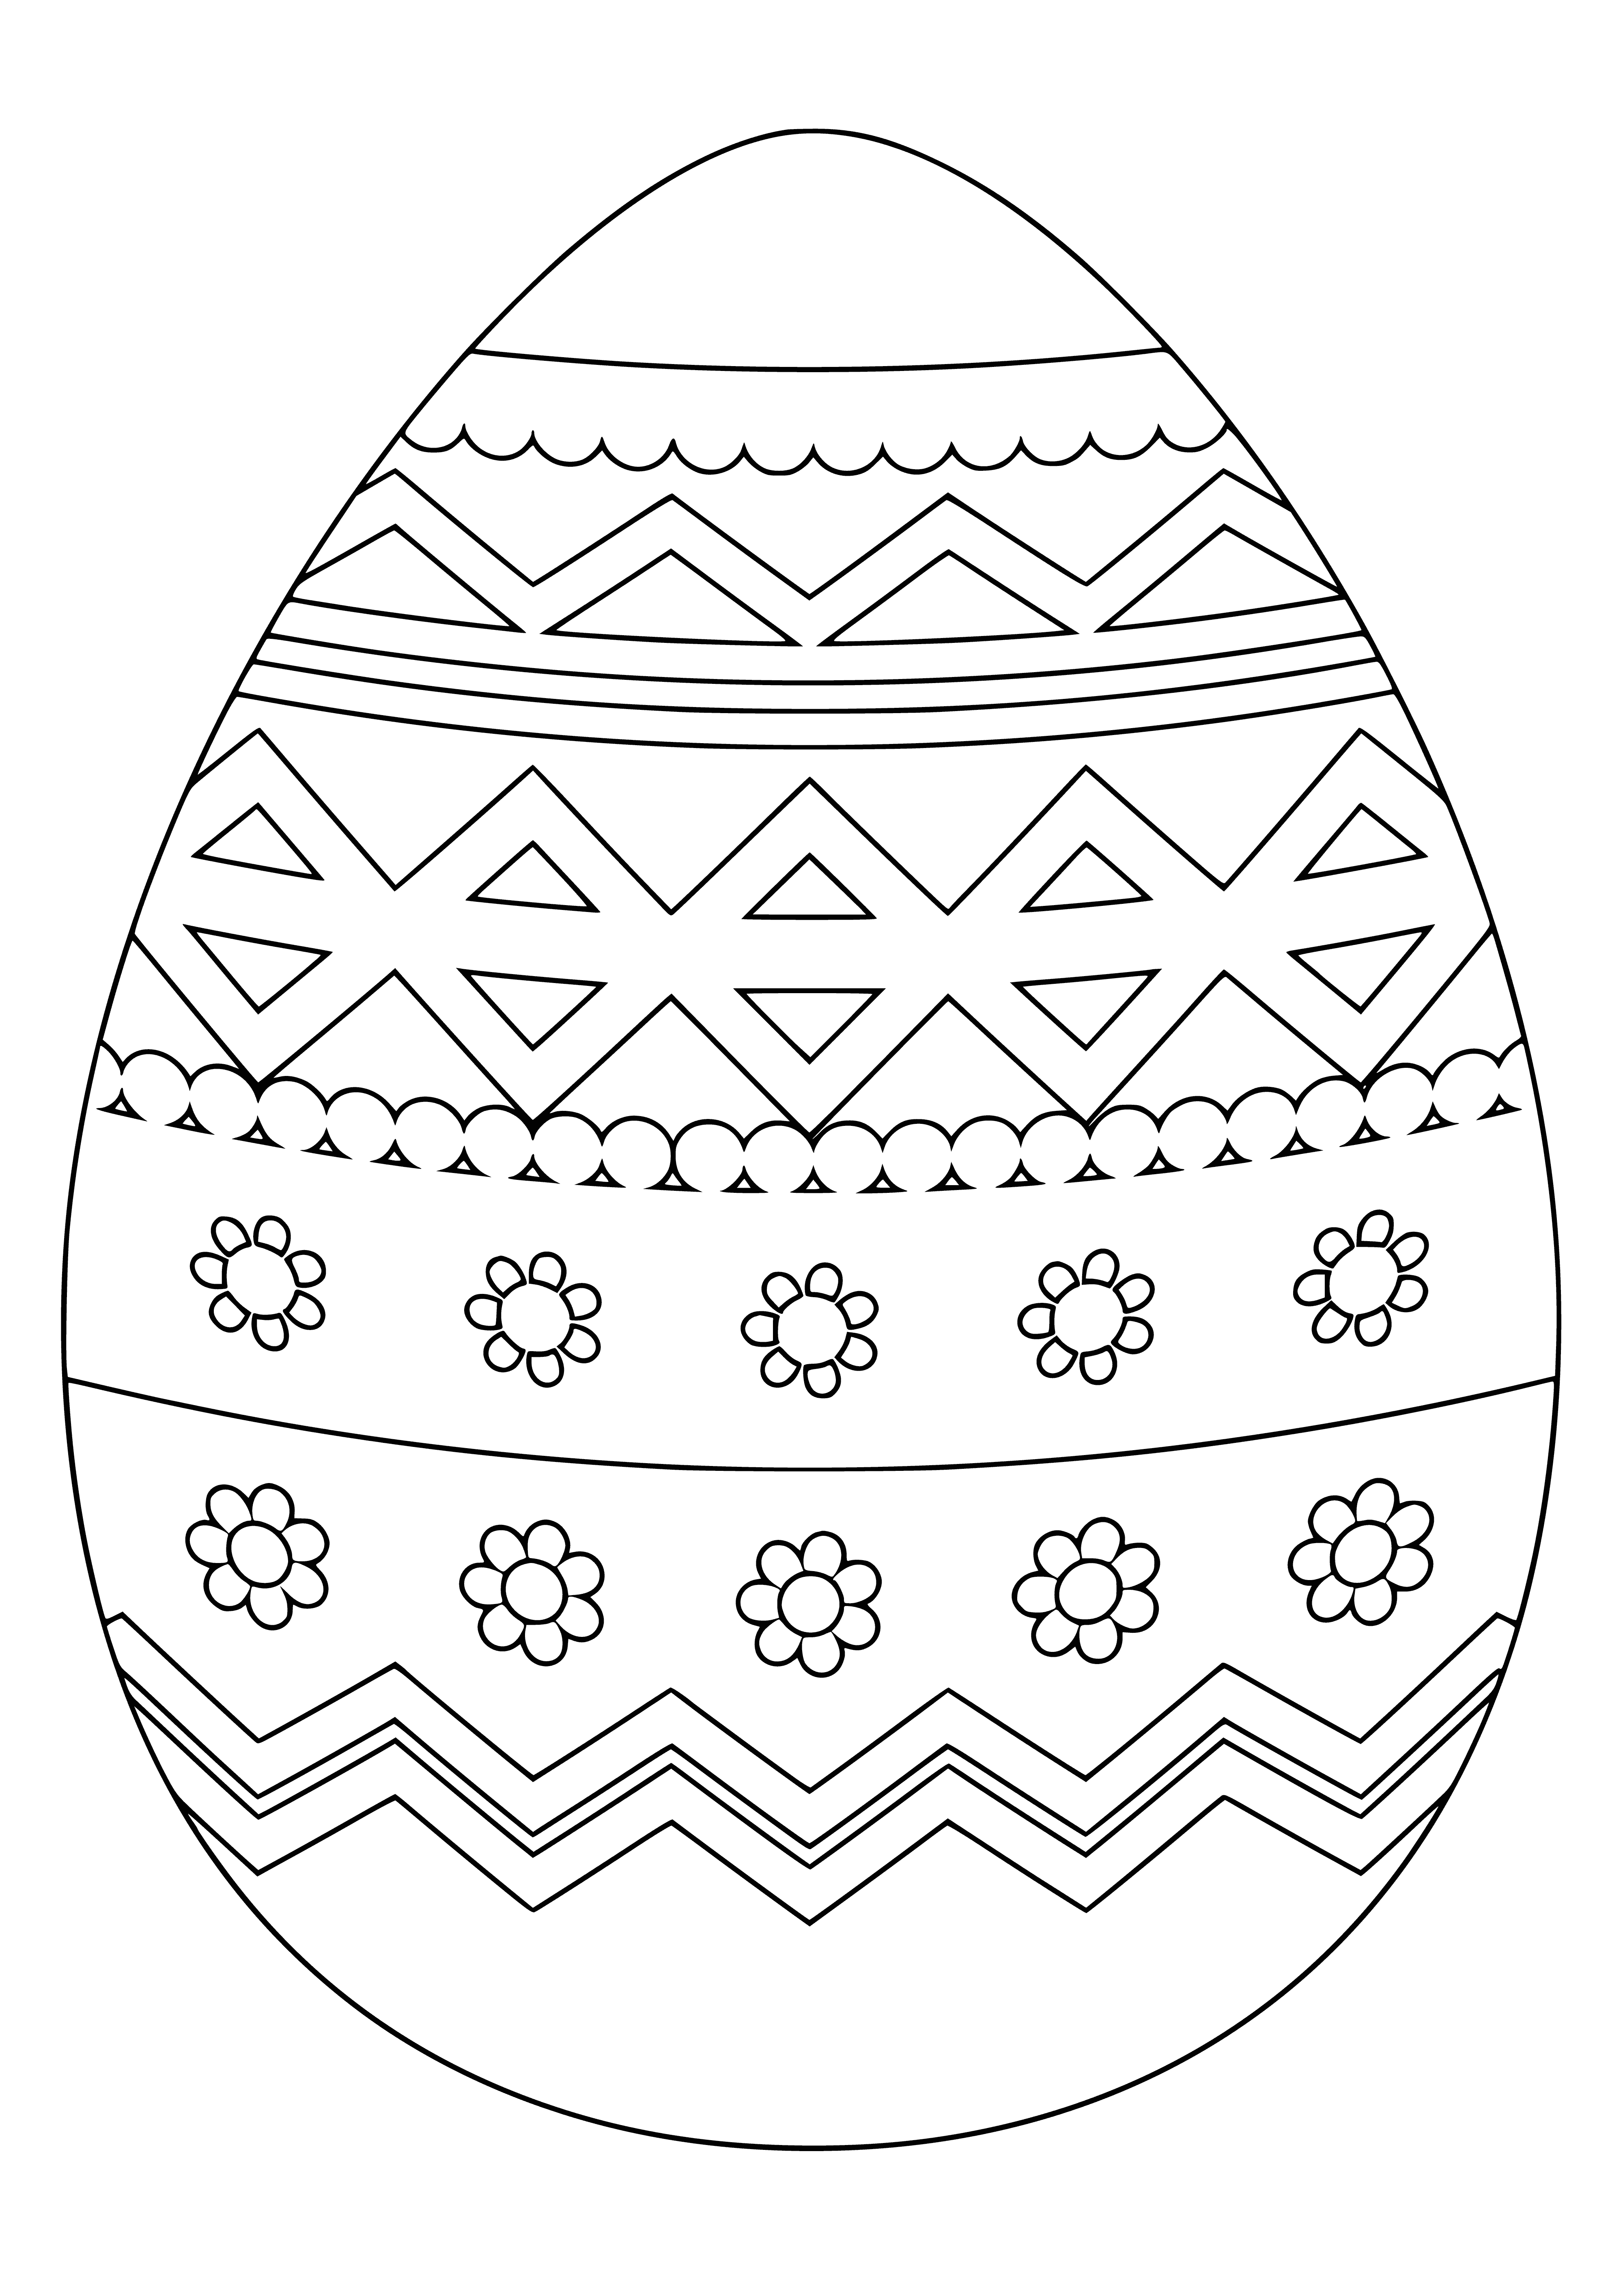 coloring page: 2 painted eggs on coloring page: pink w/ flower design & blue w/ stripes design - both have colorful tops. #Easter #Craft